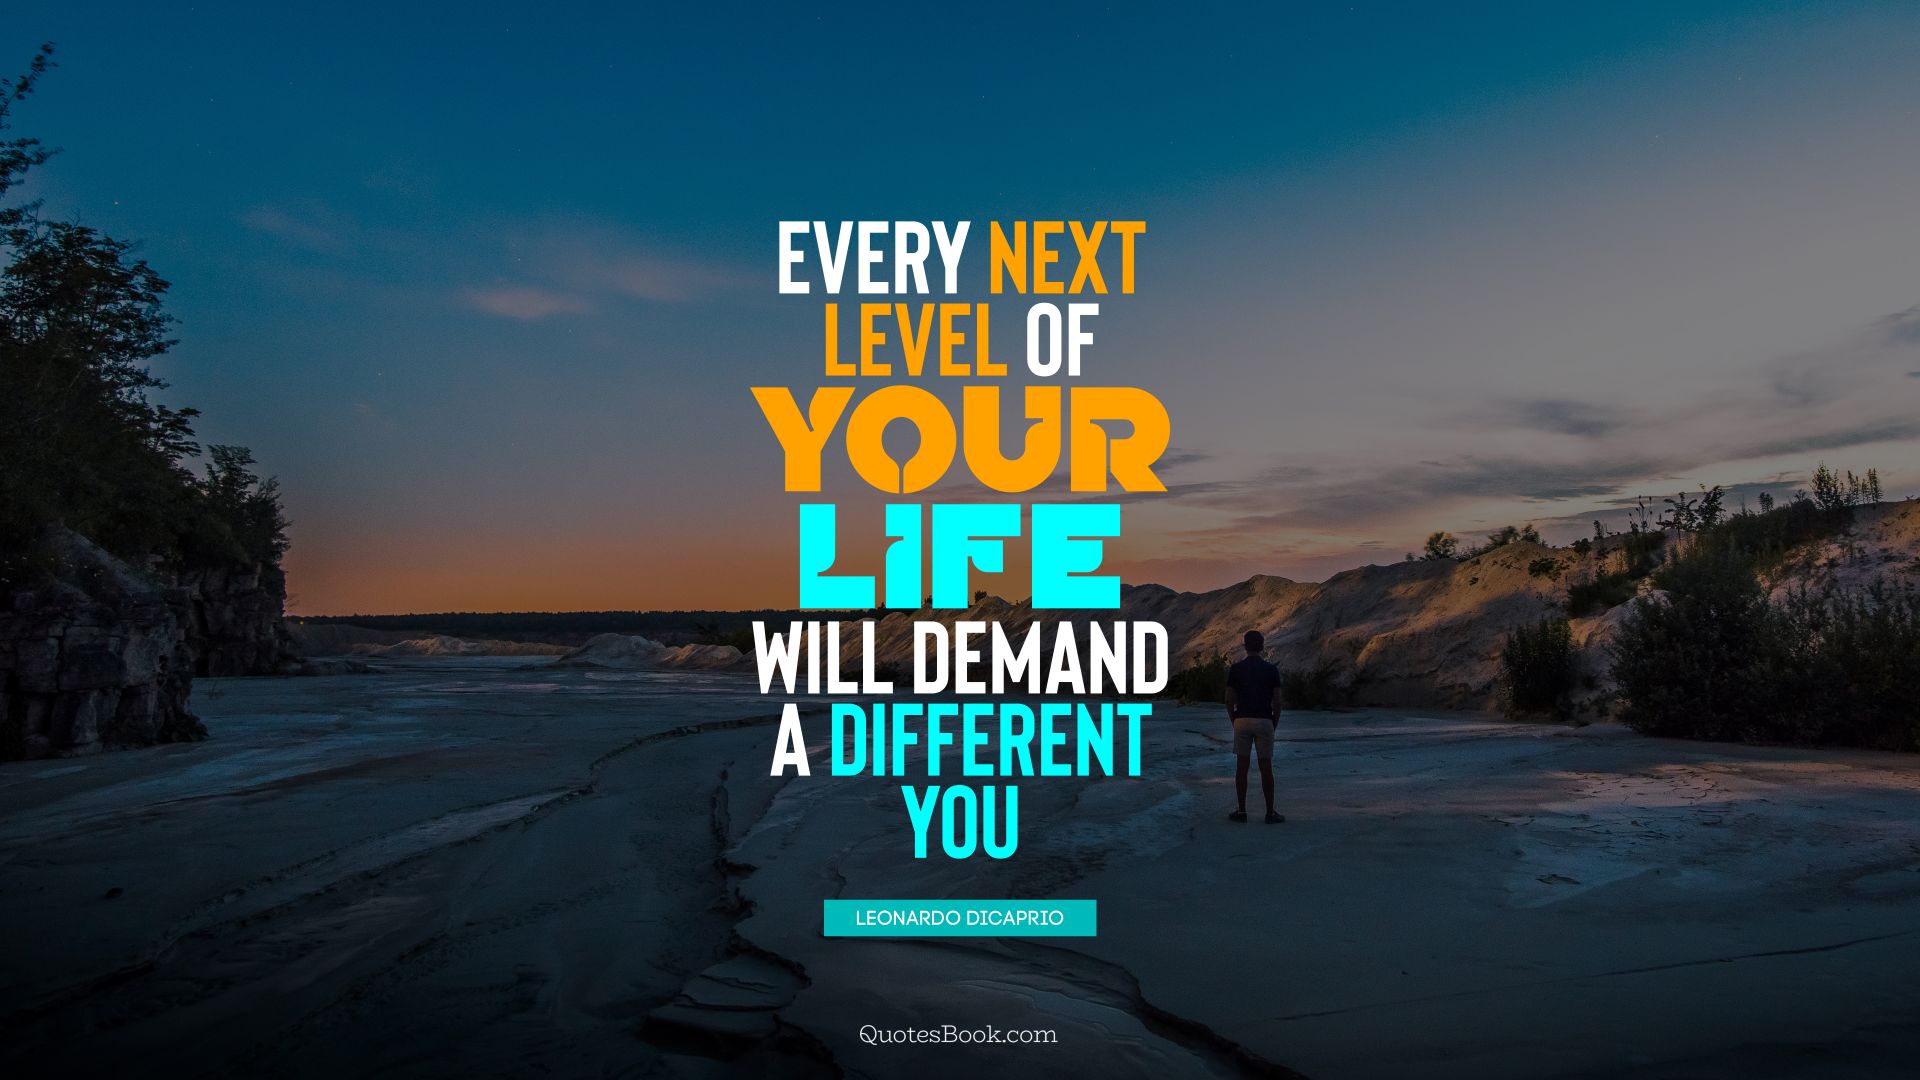 Every next level of your life will demand a different you. - Quote by Leonardo DiCaprio